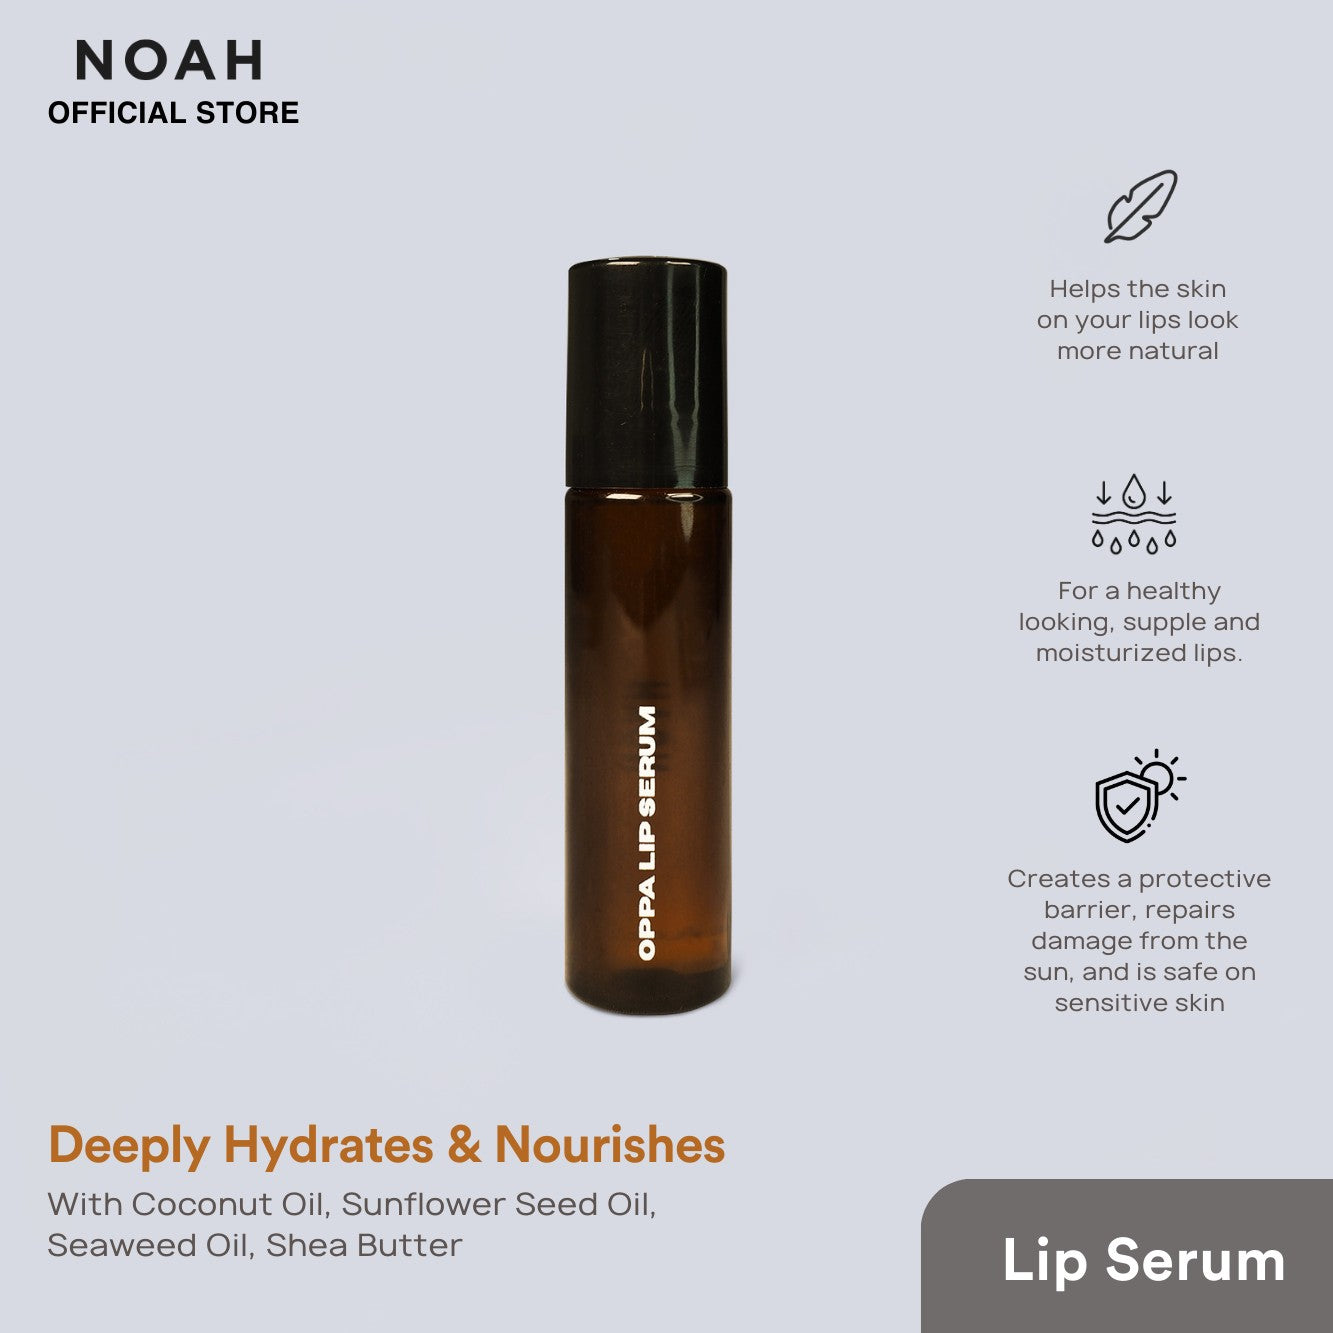 Noah Oppa Lips Serum (Hydrating, Buildable Tint, Heals Chapped Lips, Fragrance-Free)